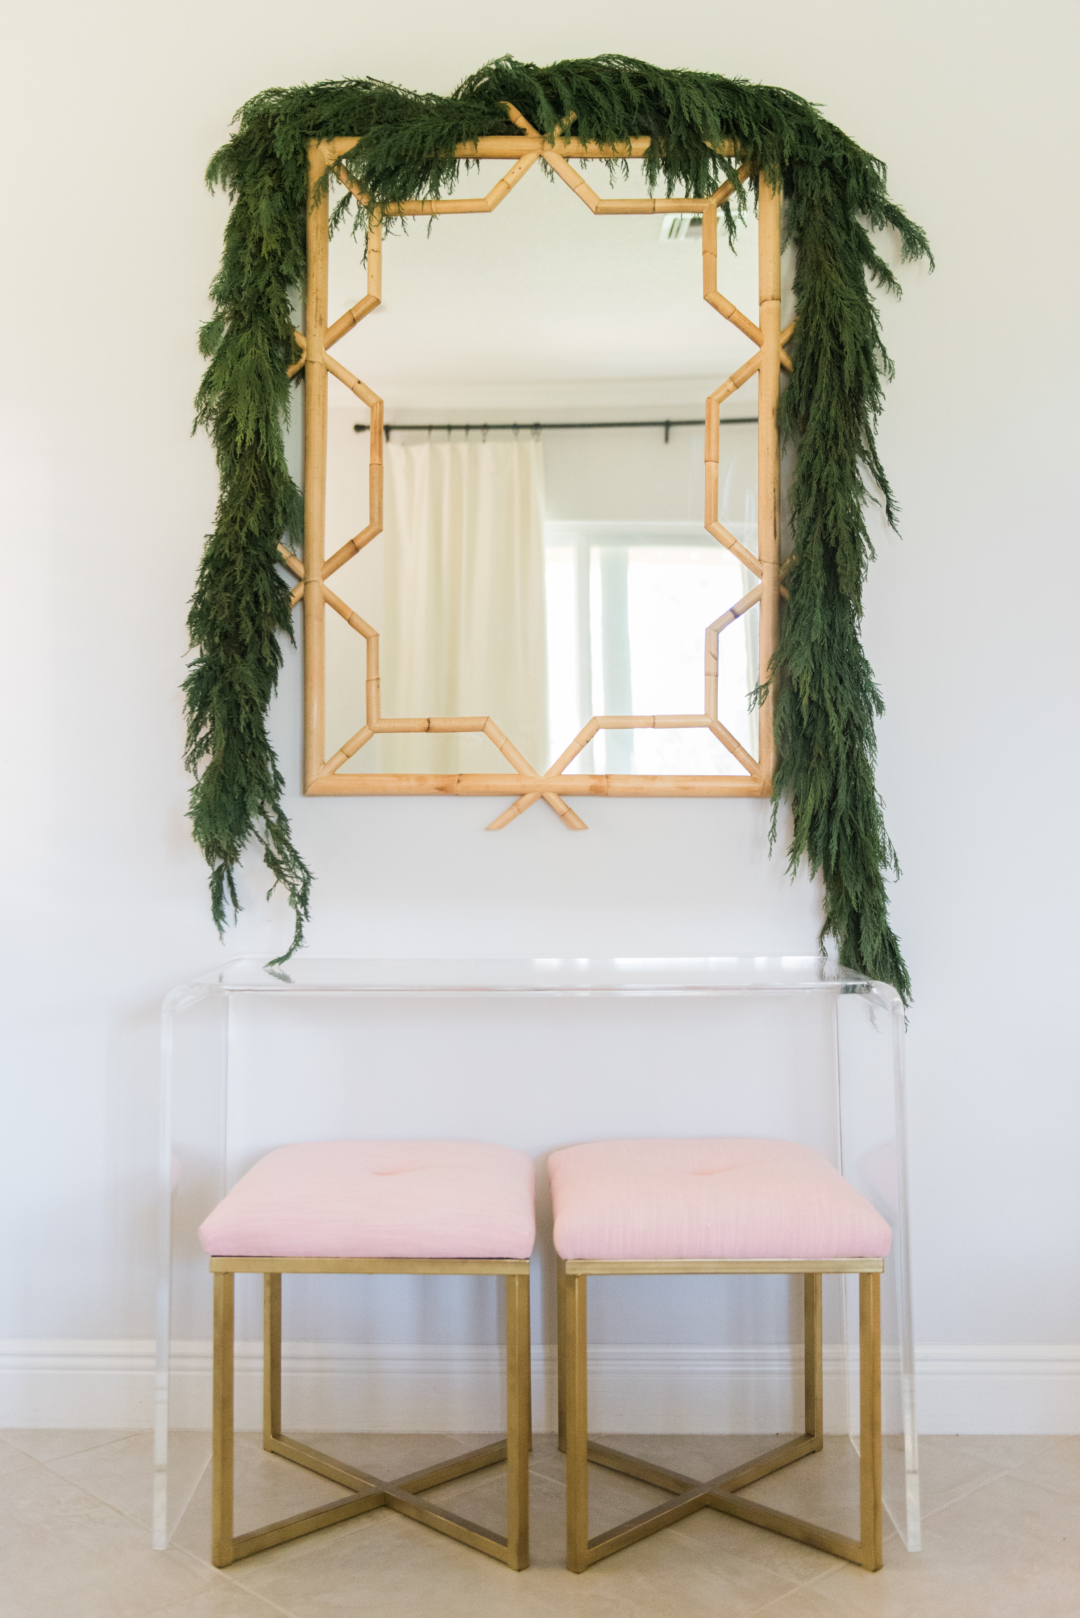 Sister style: How to style a console two ways with Palm Beach Lately and Framebridge